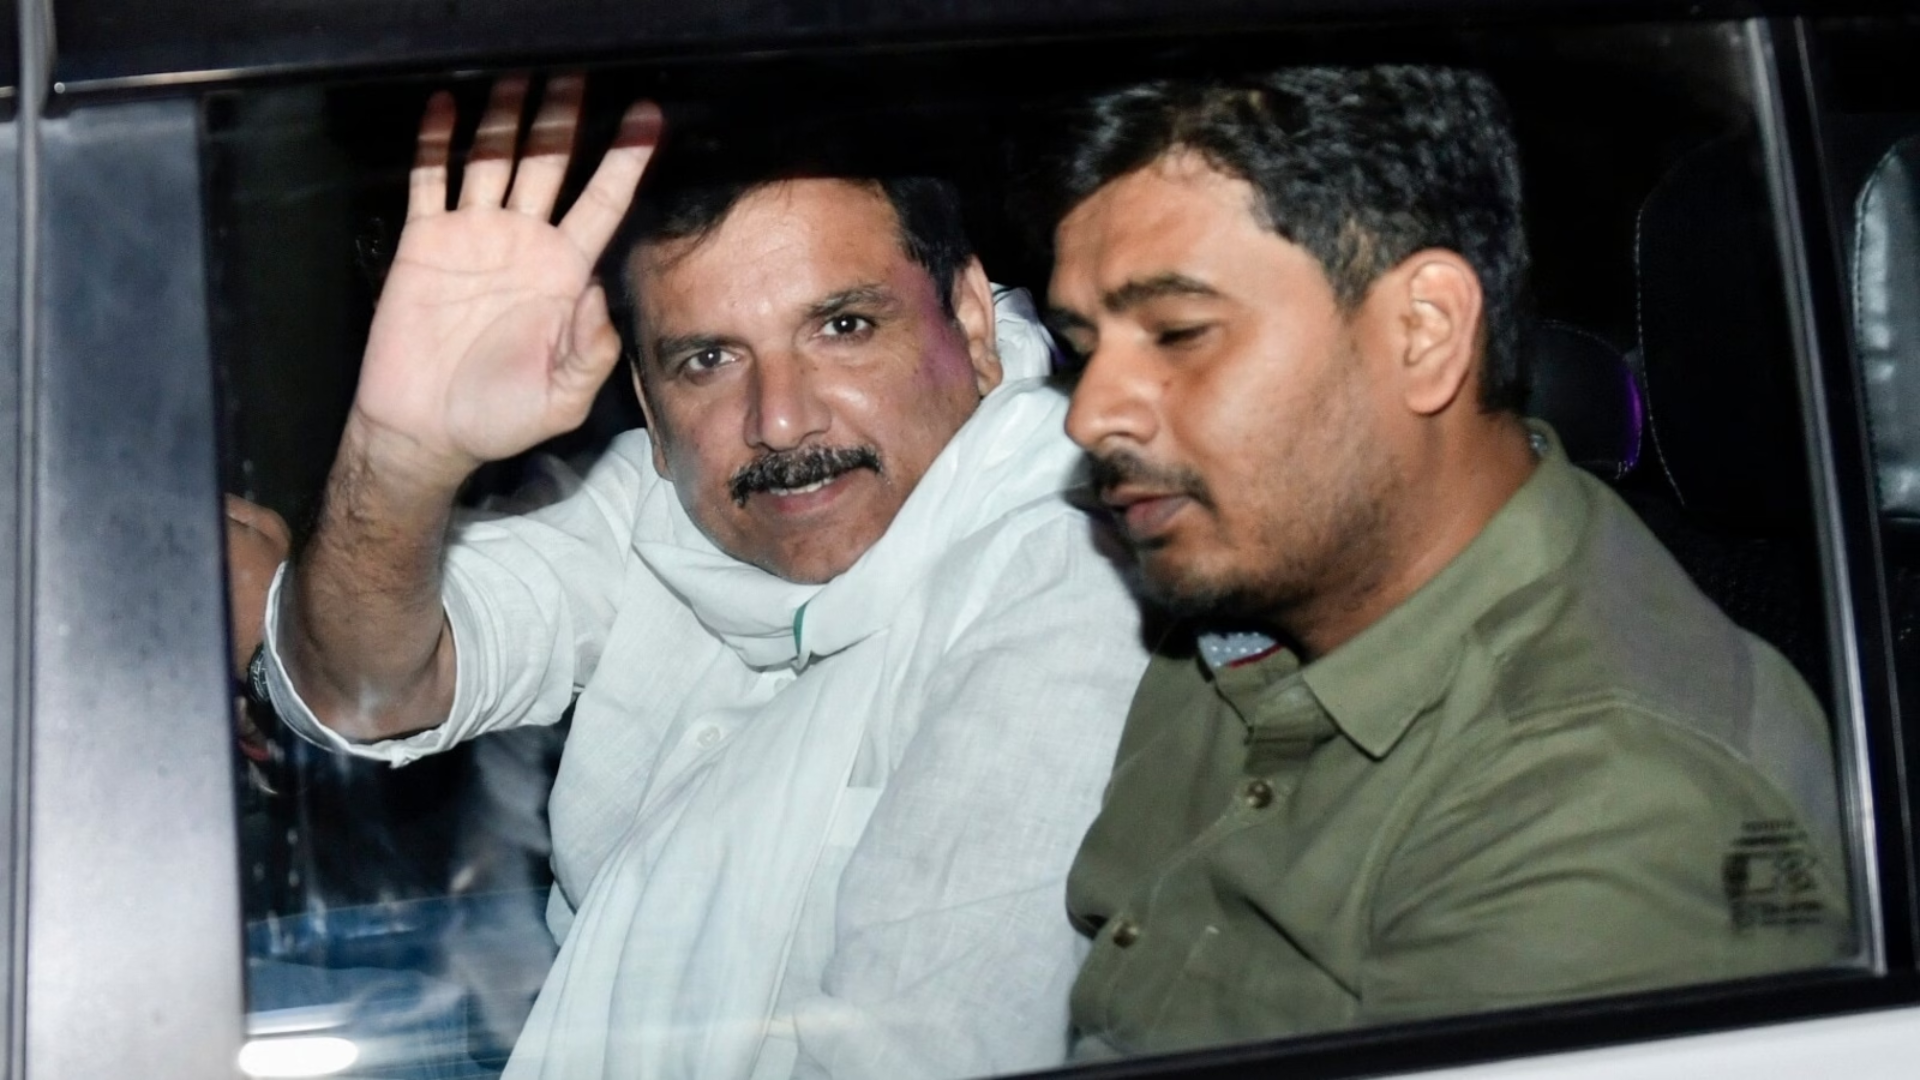 AAP Leader Sanjay Singh to be Taken to Parliament for Oath Amidst Judicial Custody